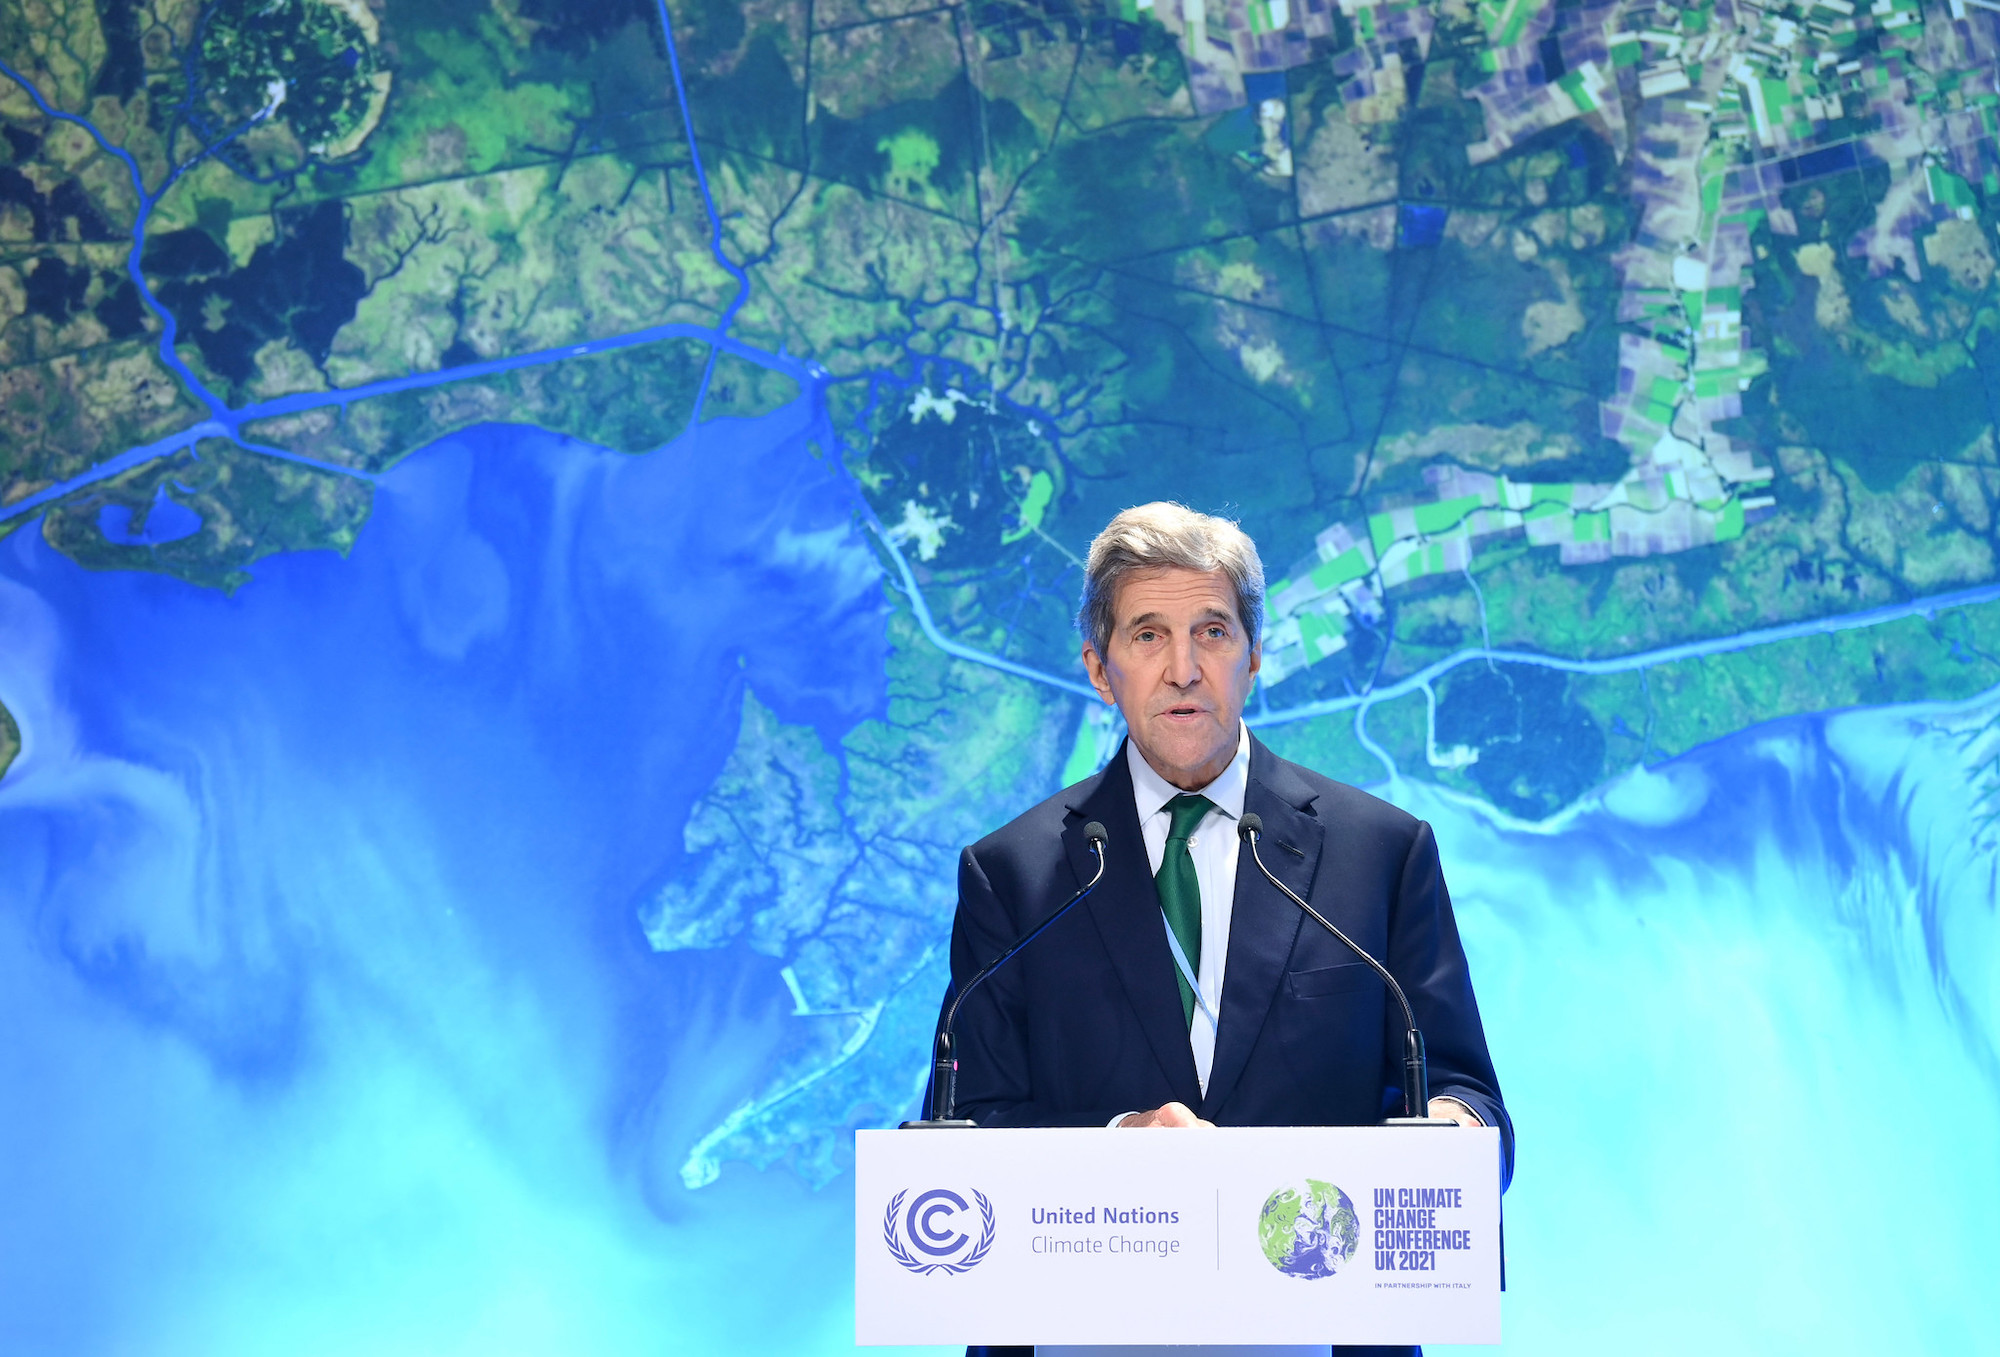 US climate envoy John Kerry speaking at 'Ocean action is climate action' event at cop26